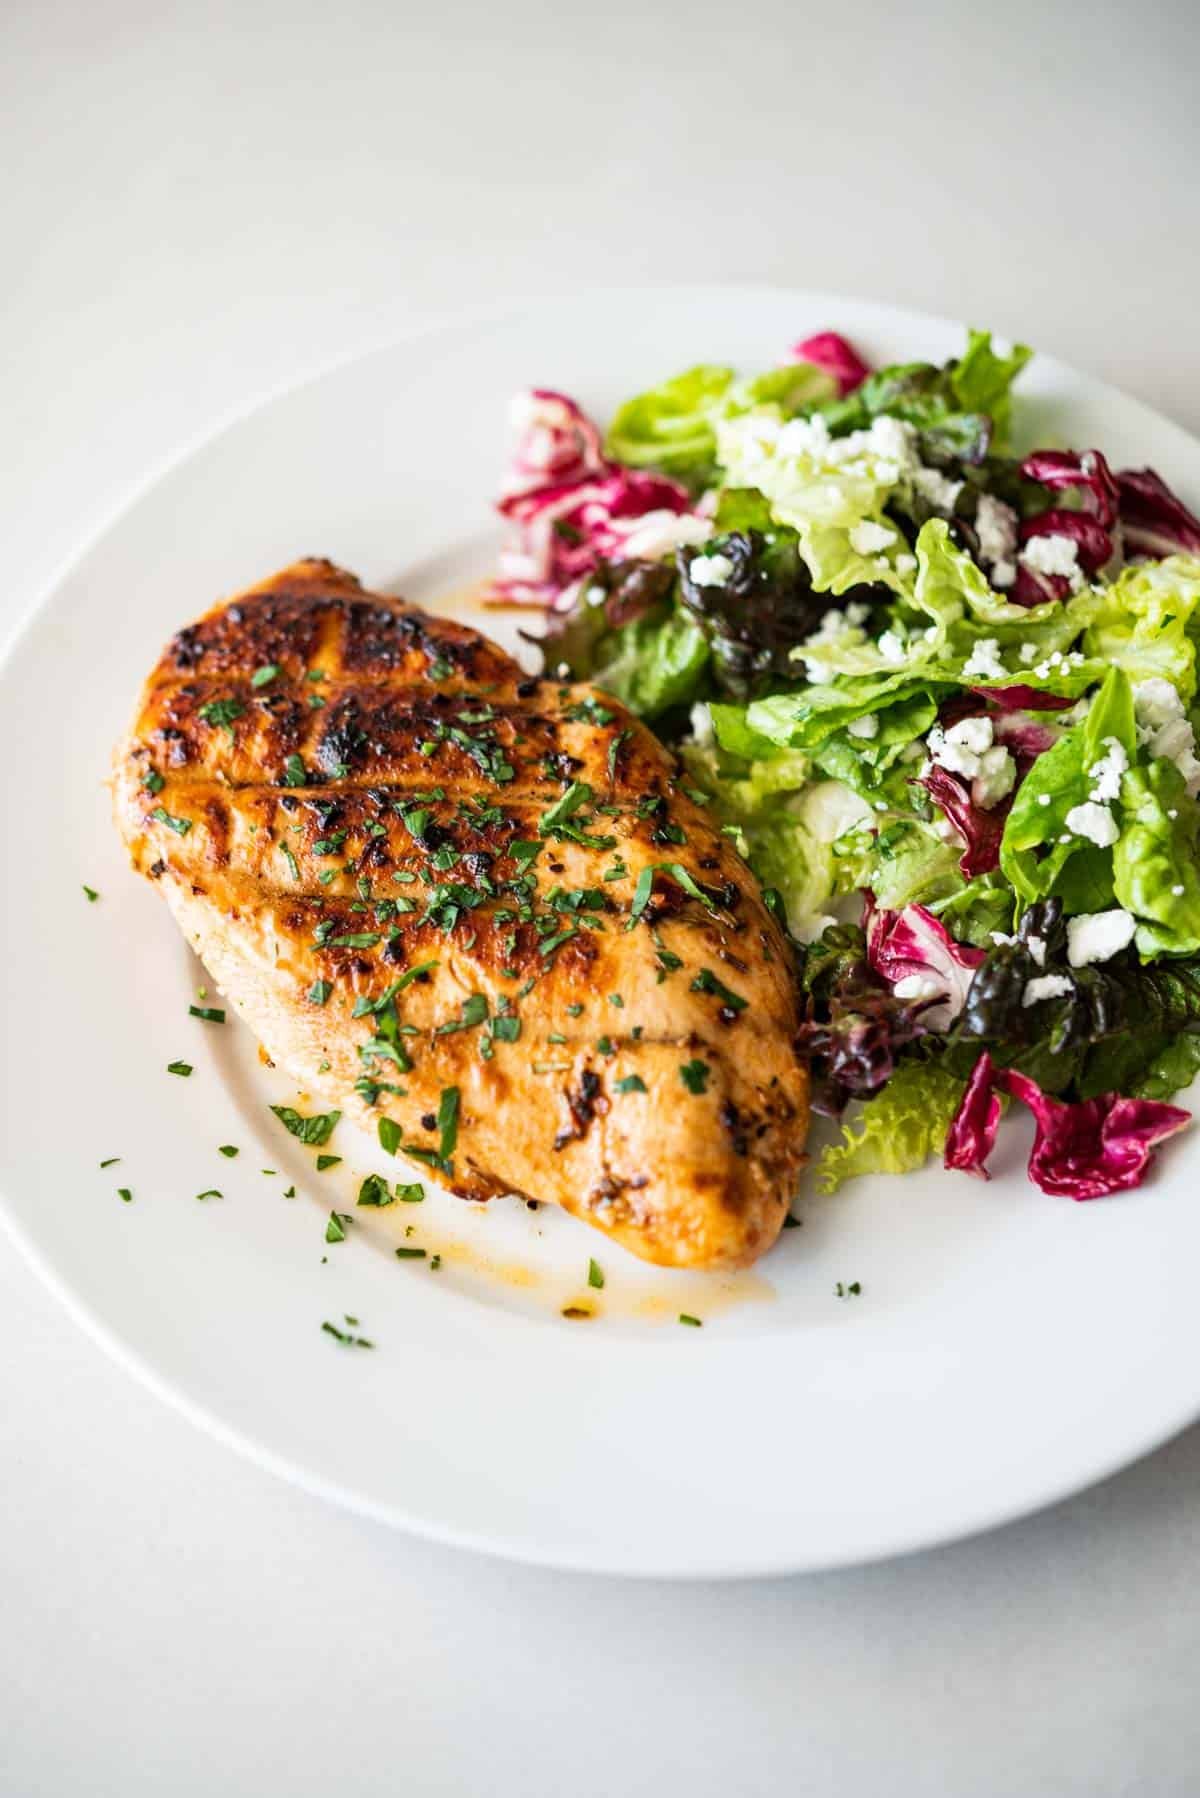 a grilled chicken breast with a salad on a plate.